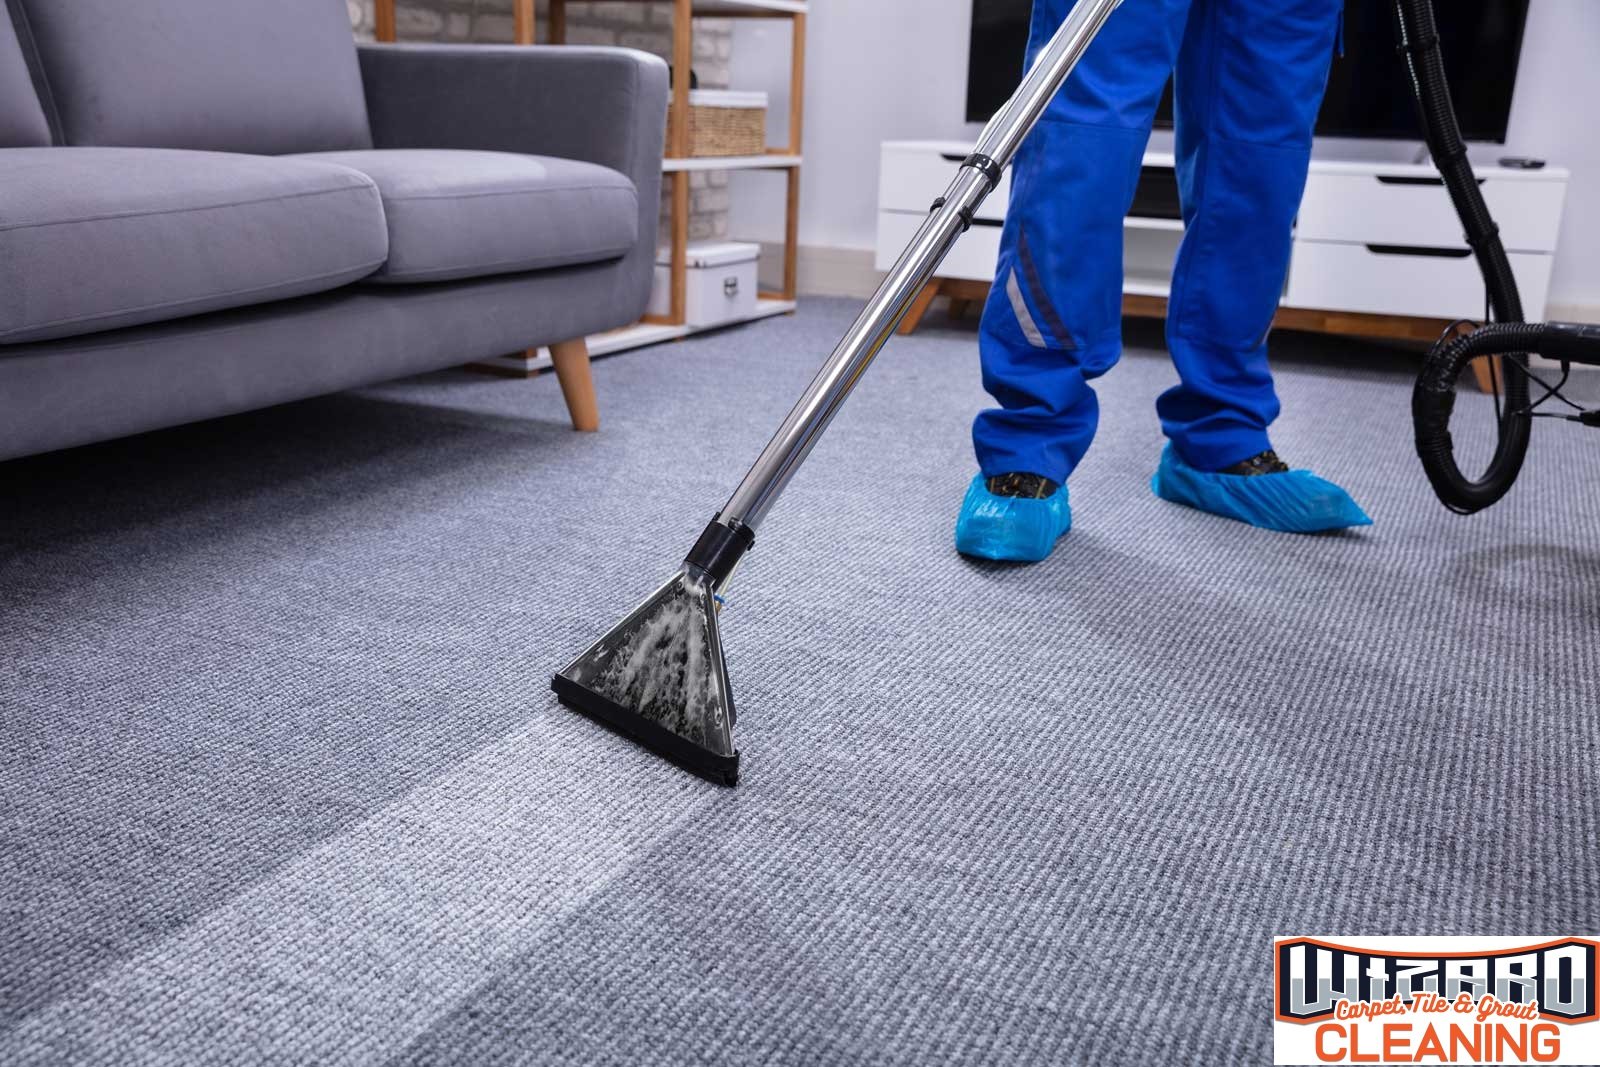 Uncover the Benefits of Regular Carpet Cleaning Services